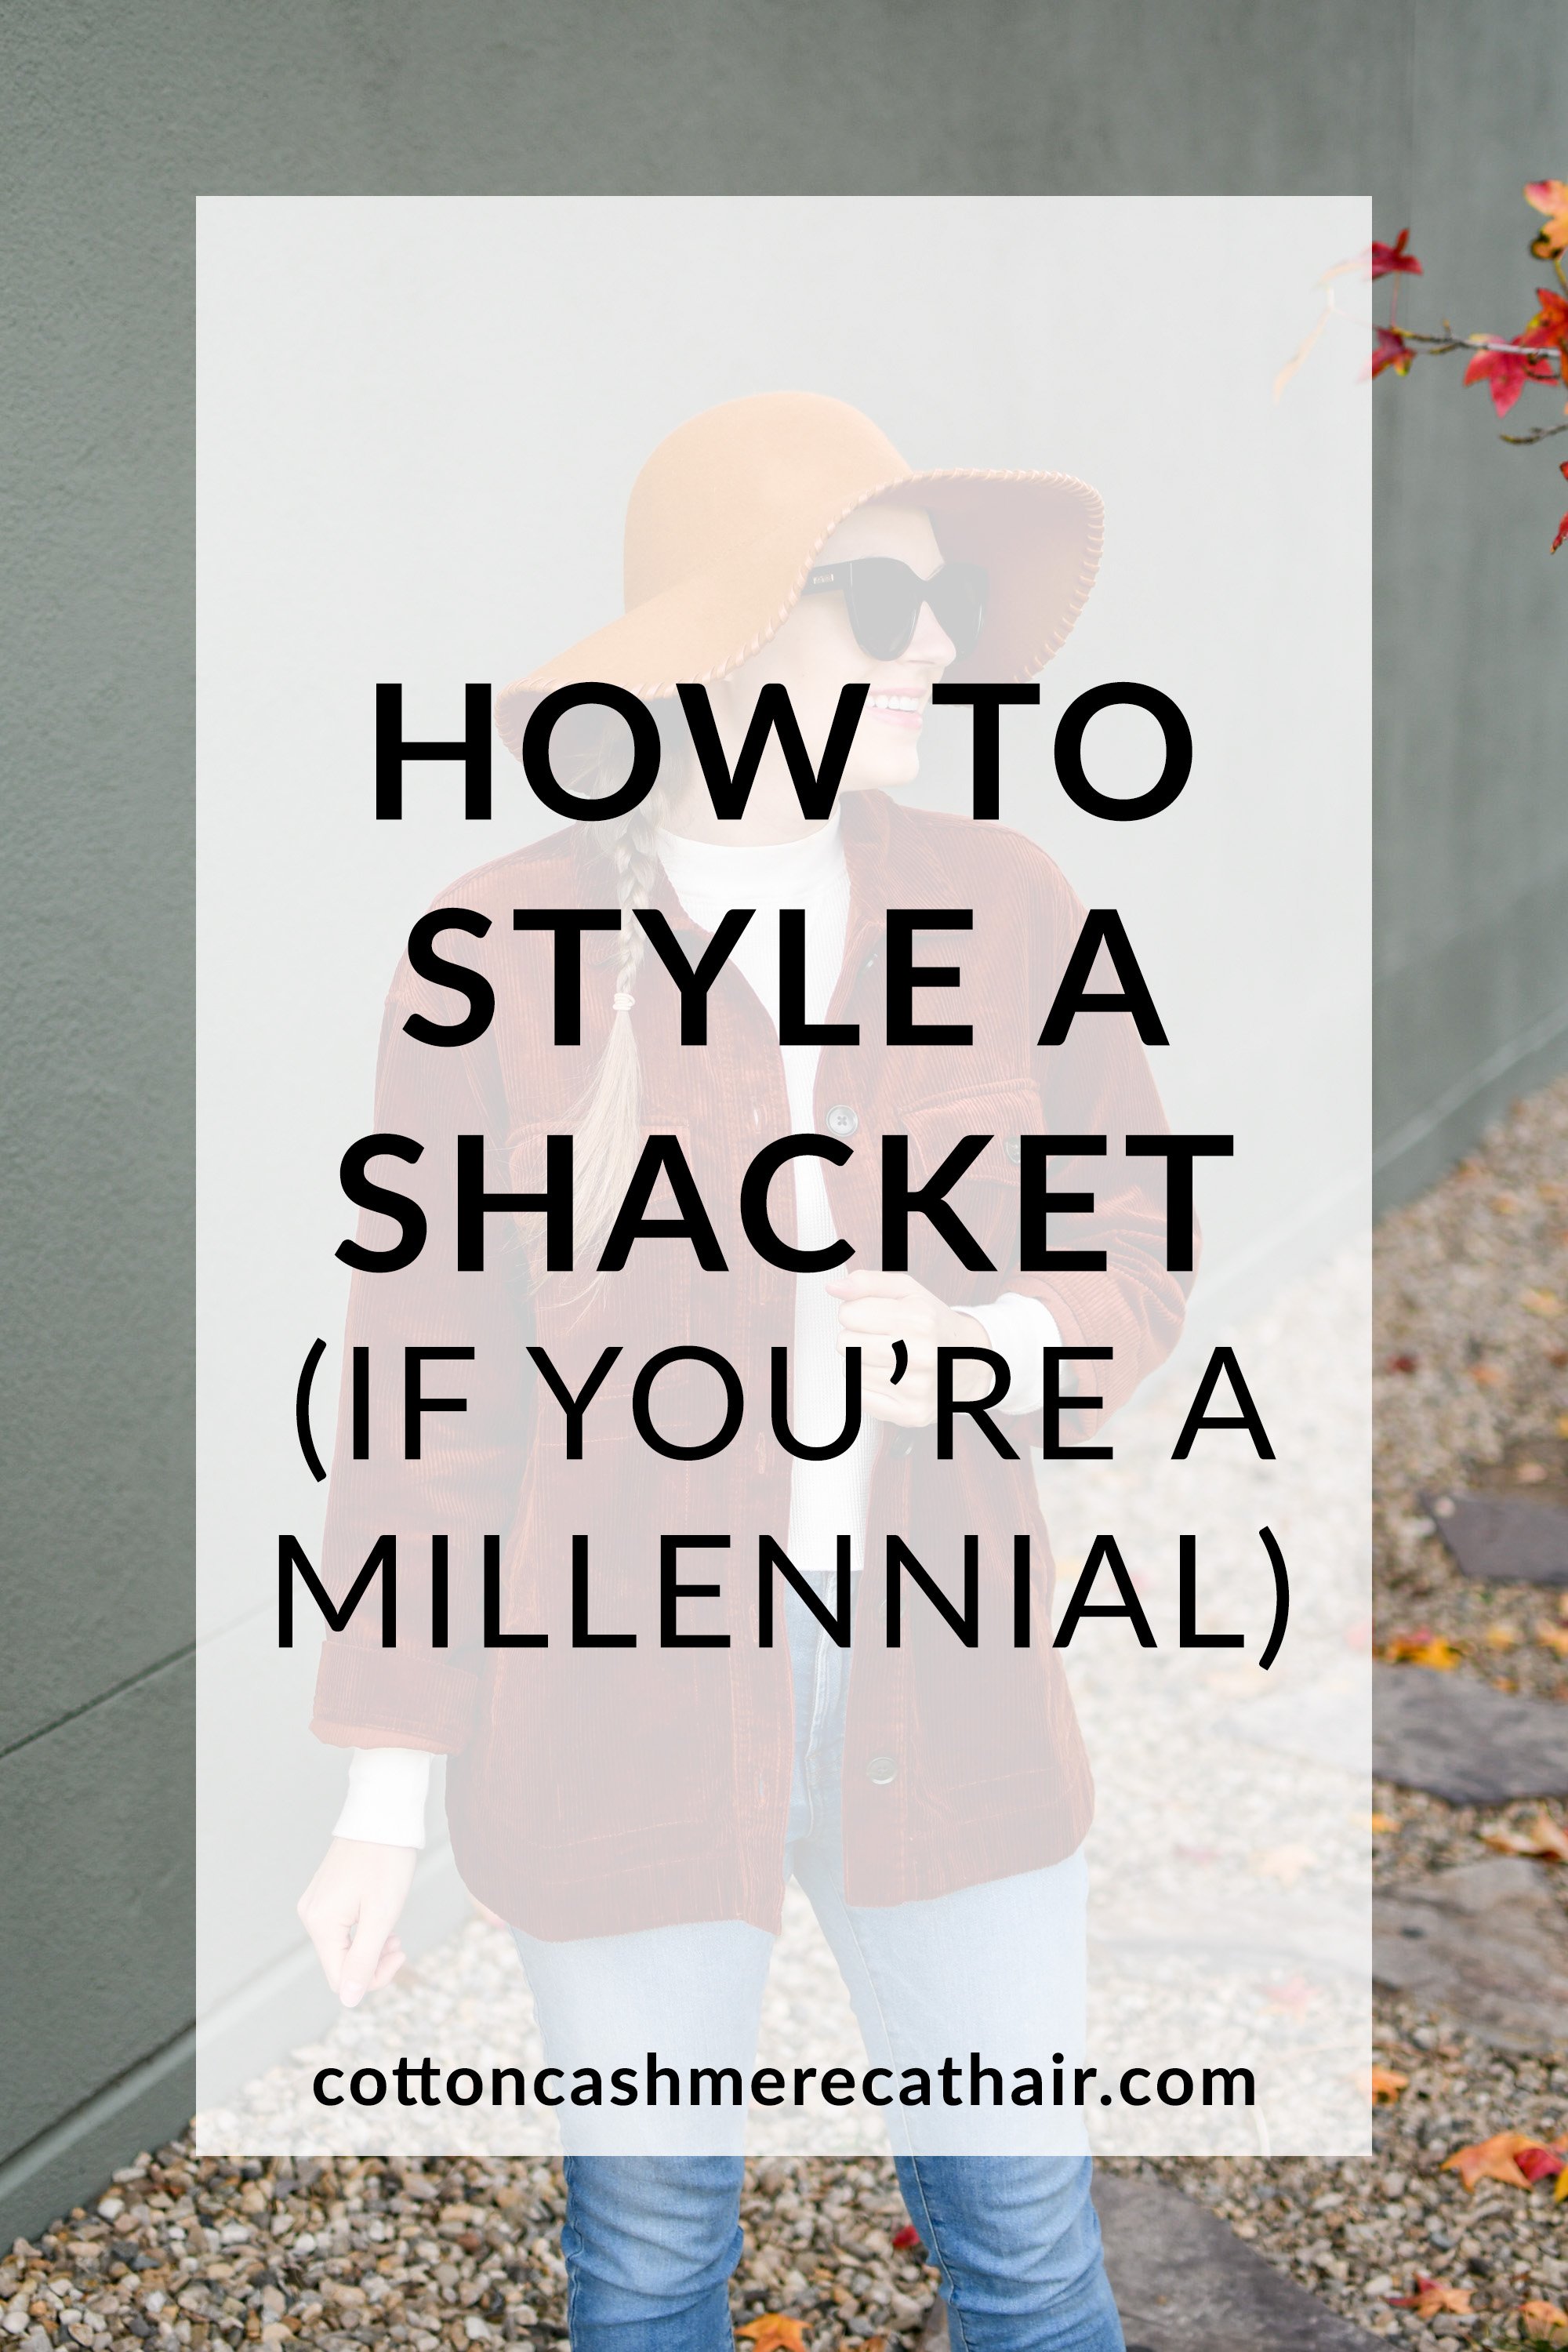 How to style a shacket if you're a millennial